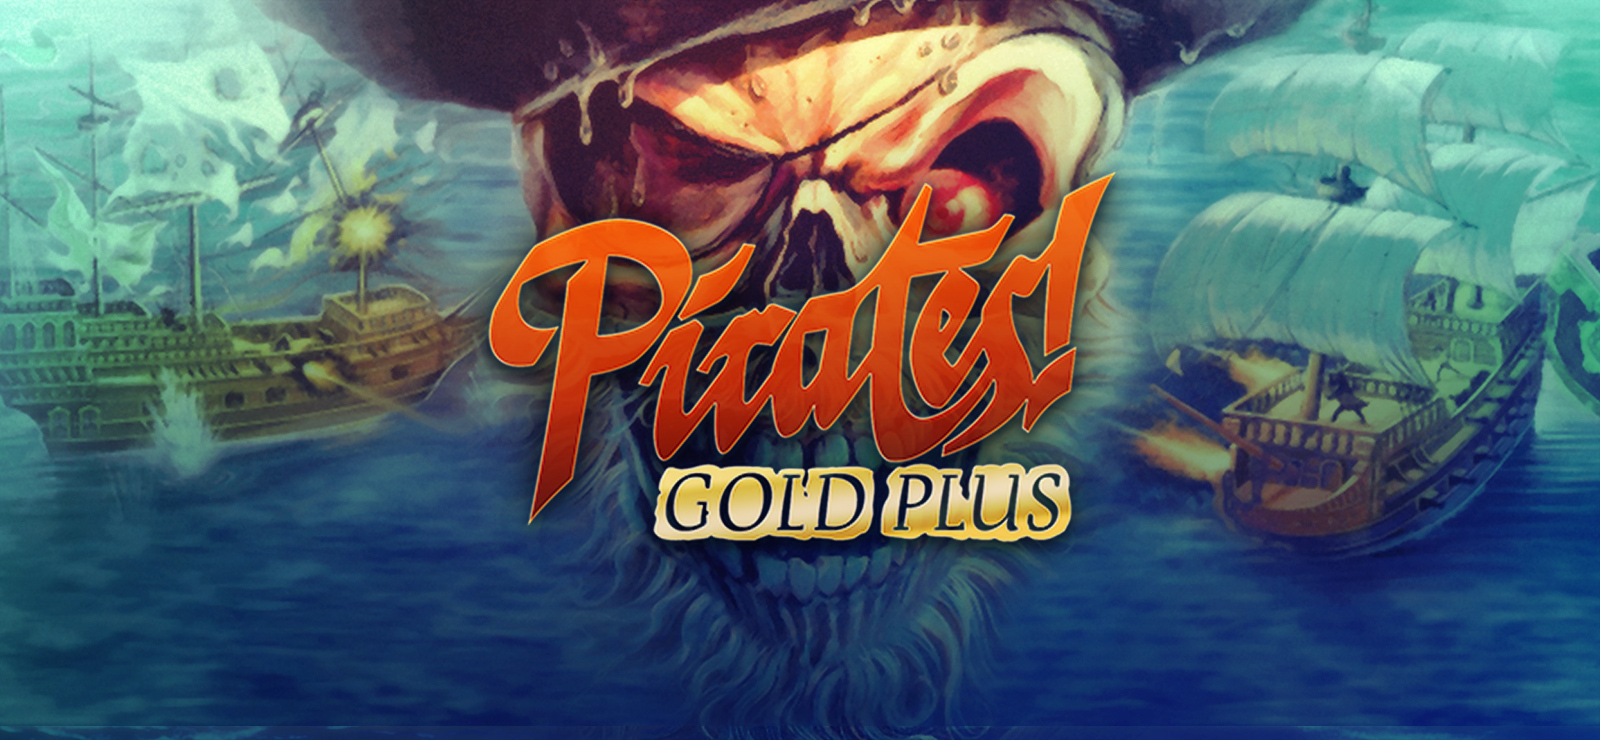 Golden Age Of Pirates Gameplay - One Piece RPG Android 